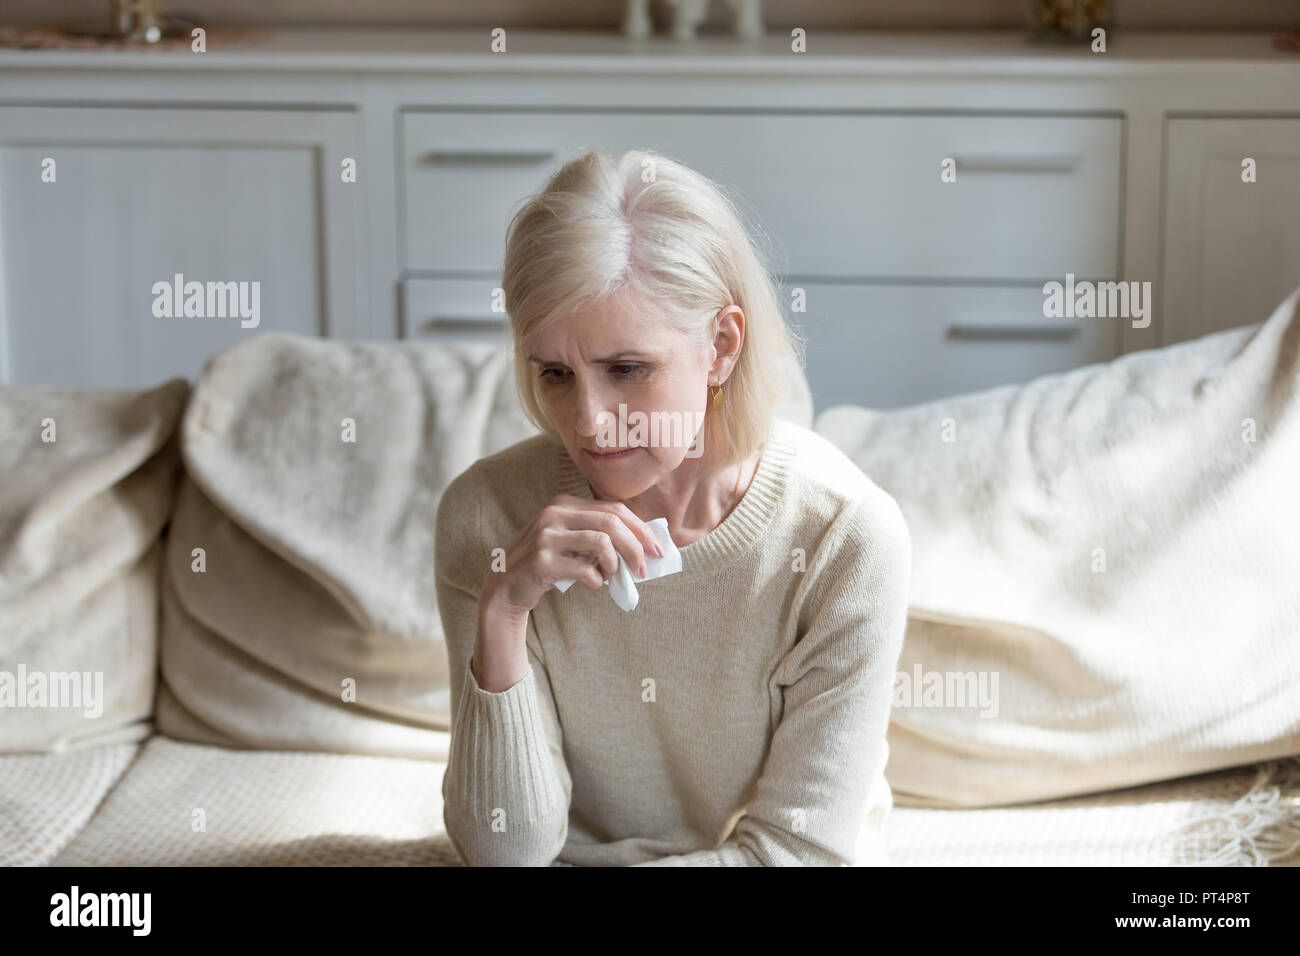 Sad lonely middle aged woman crying holding handkerchief, grievi Stock Photo